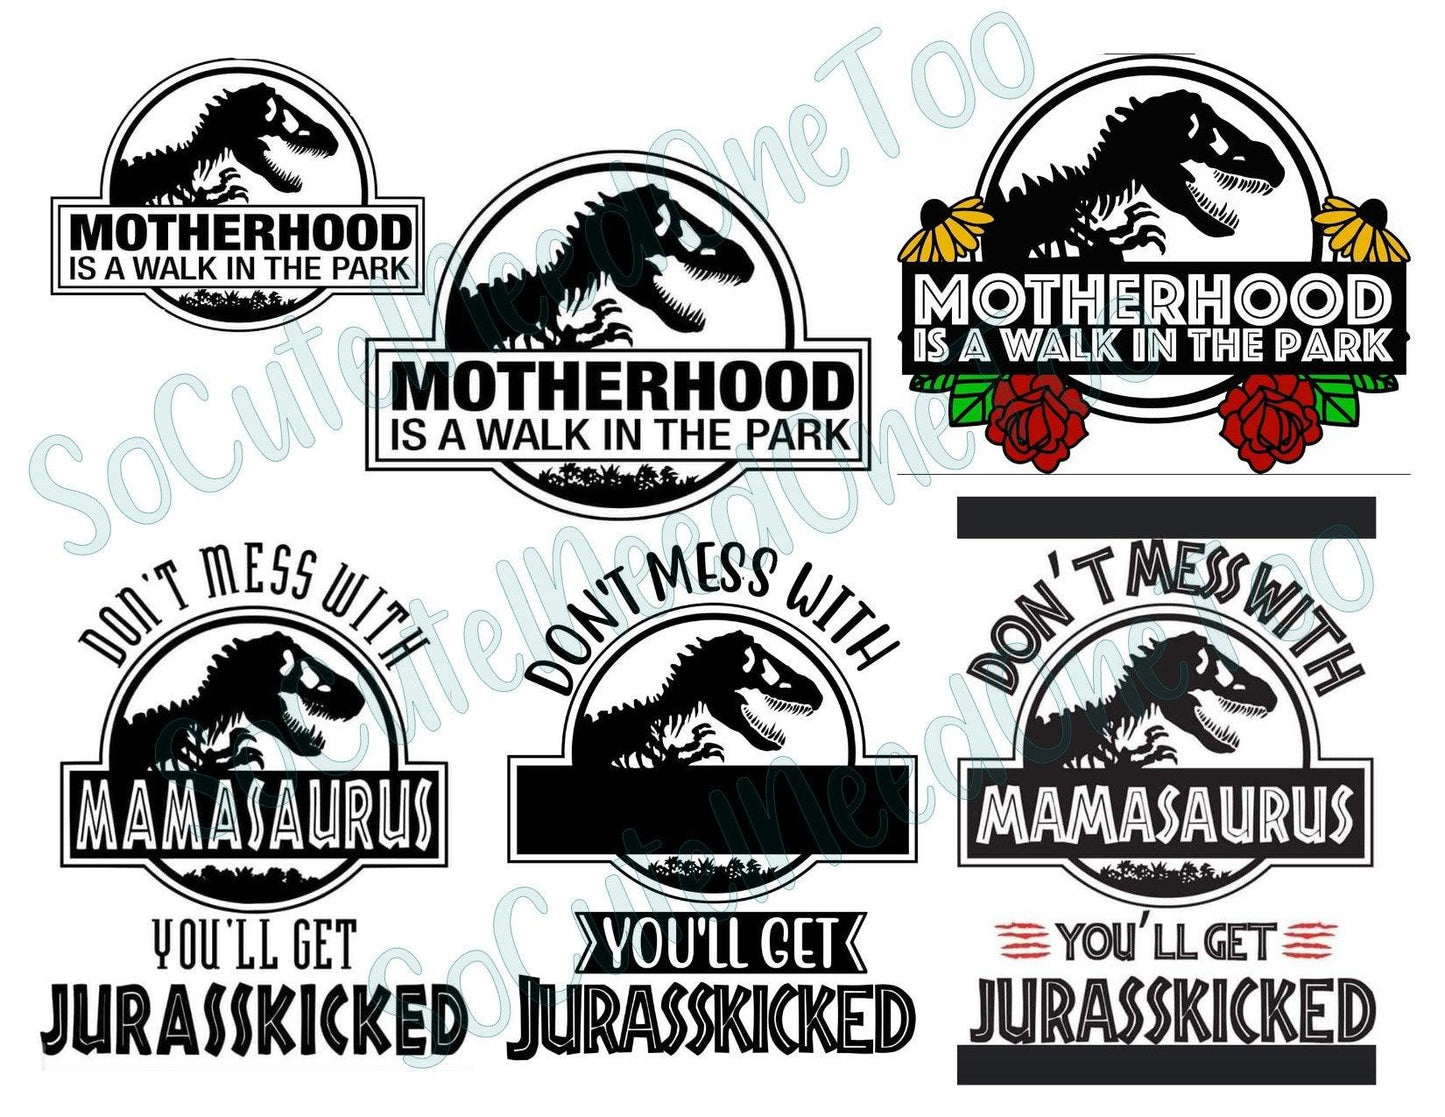 Mamasaurus #2 Decals On Clear Water Slide Paper Sealed & Ready To Use - SoCuteINeedOneToo